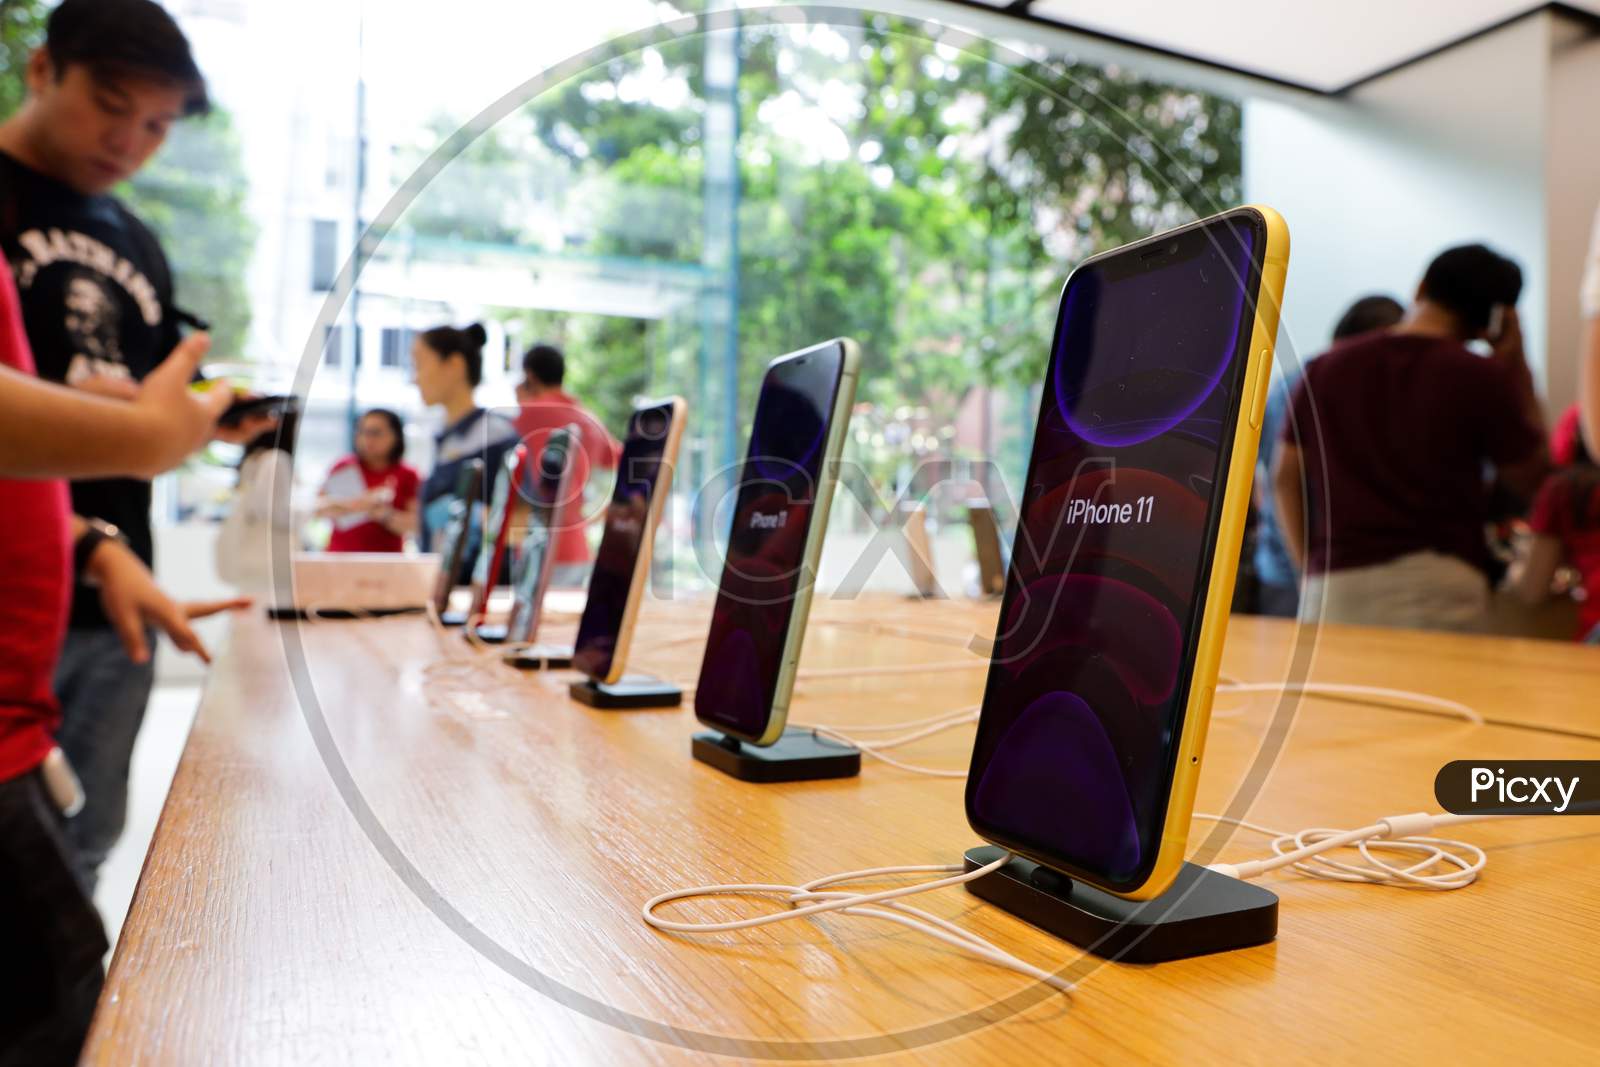 Iphone 11 Mobiles Mobile In Display At an Electronic Store